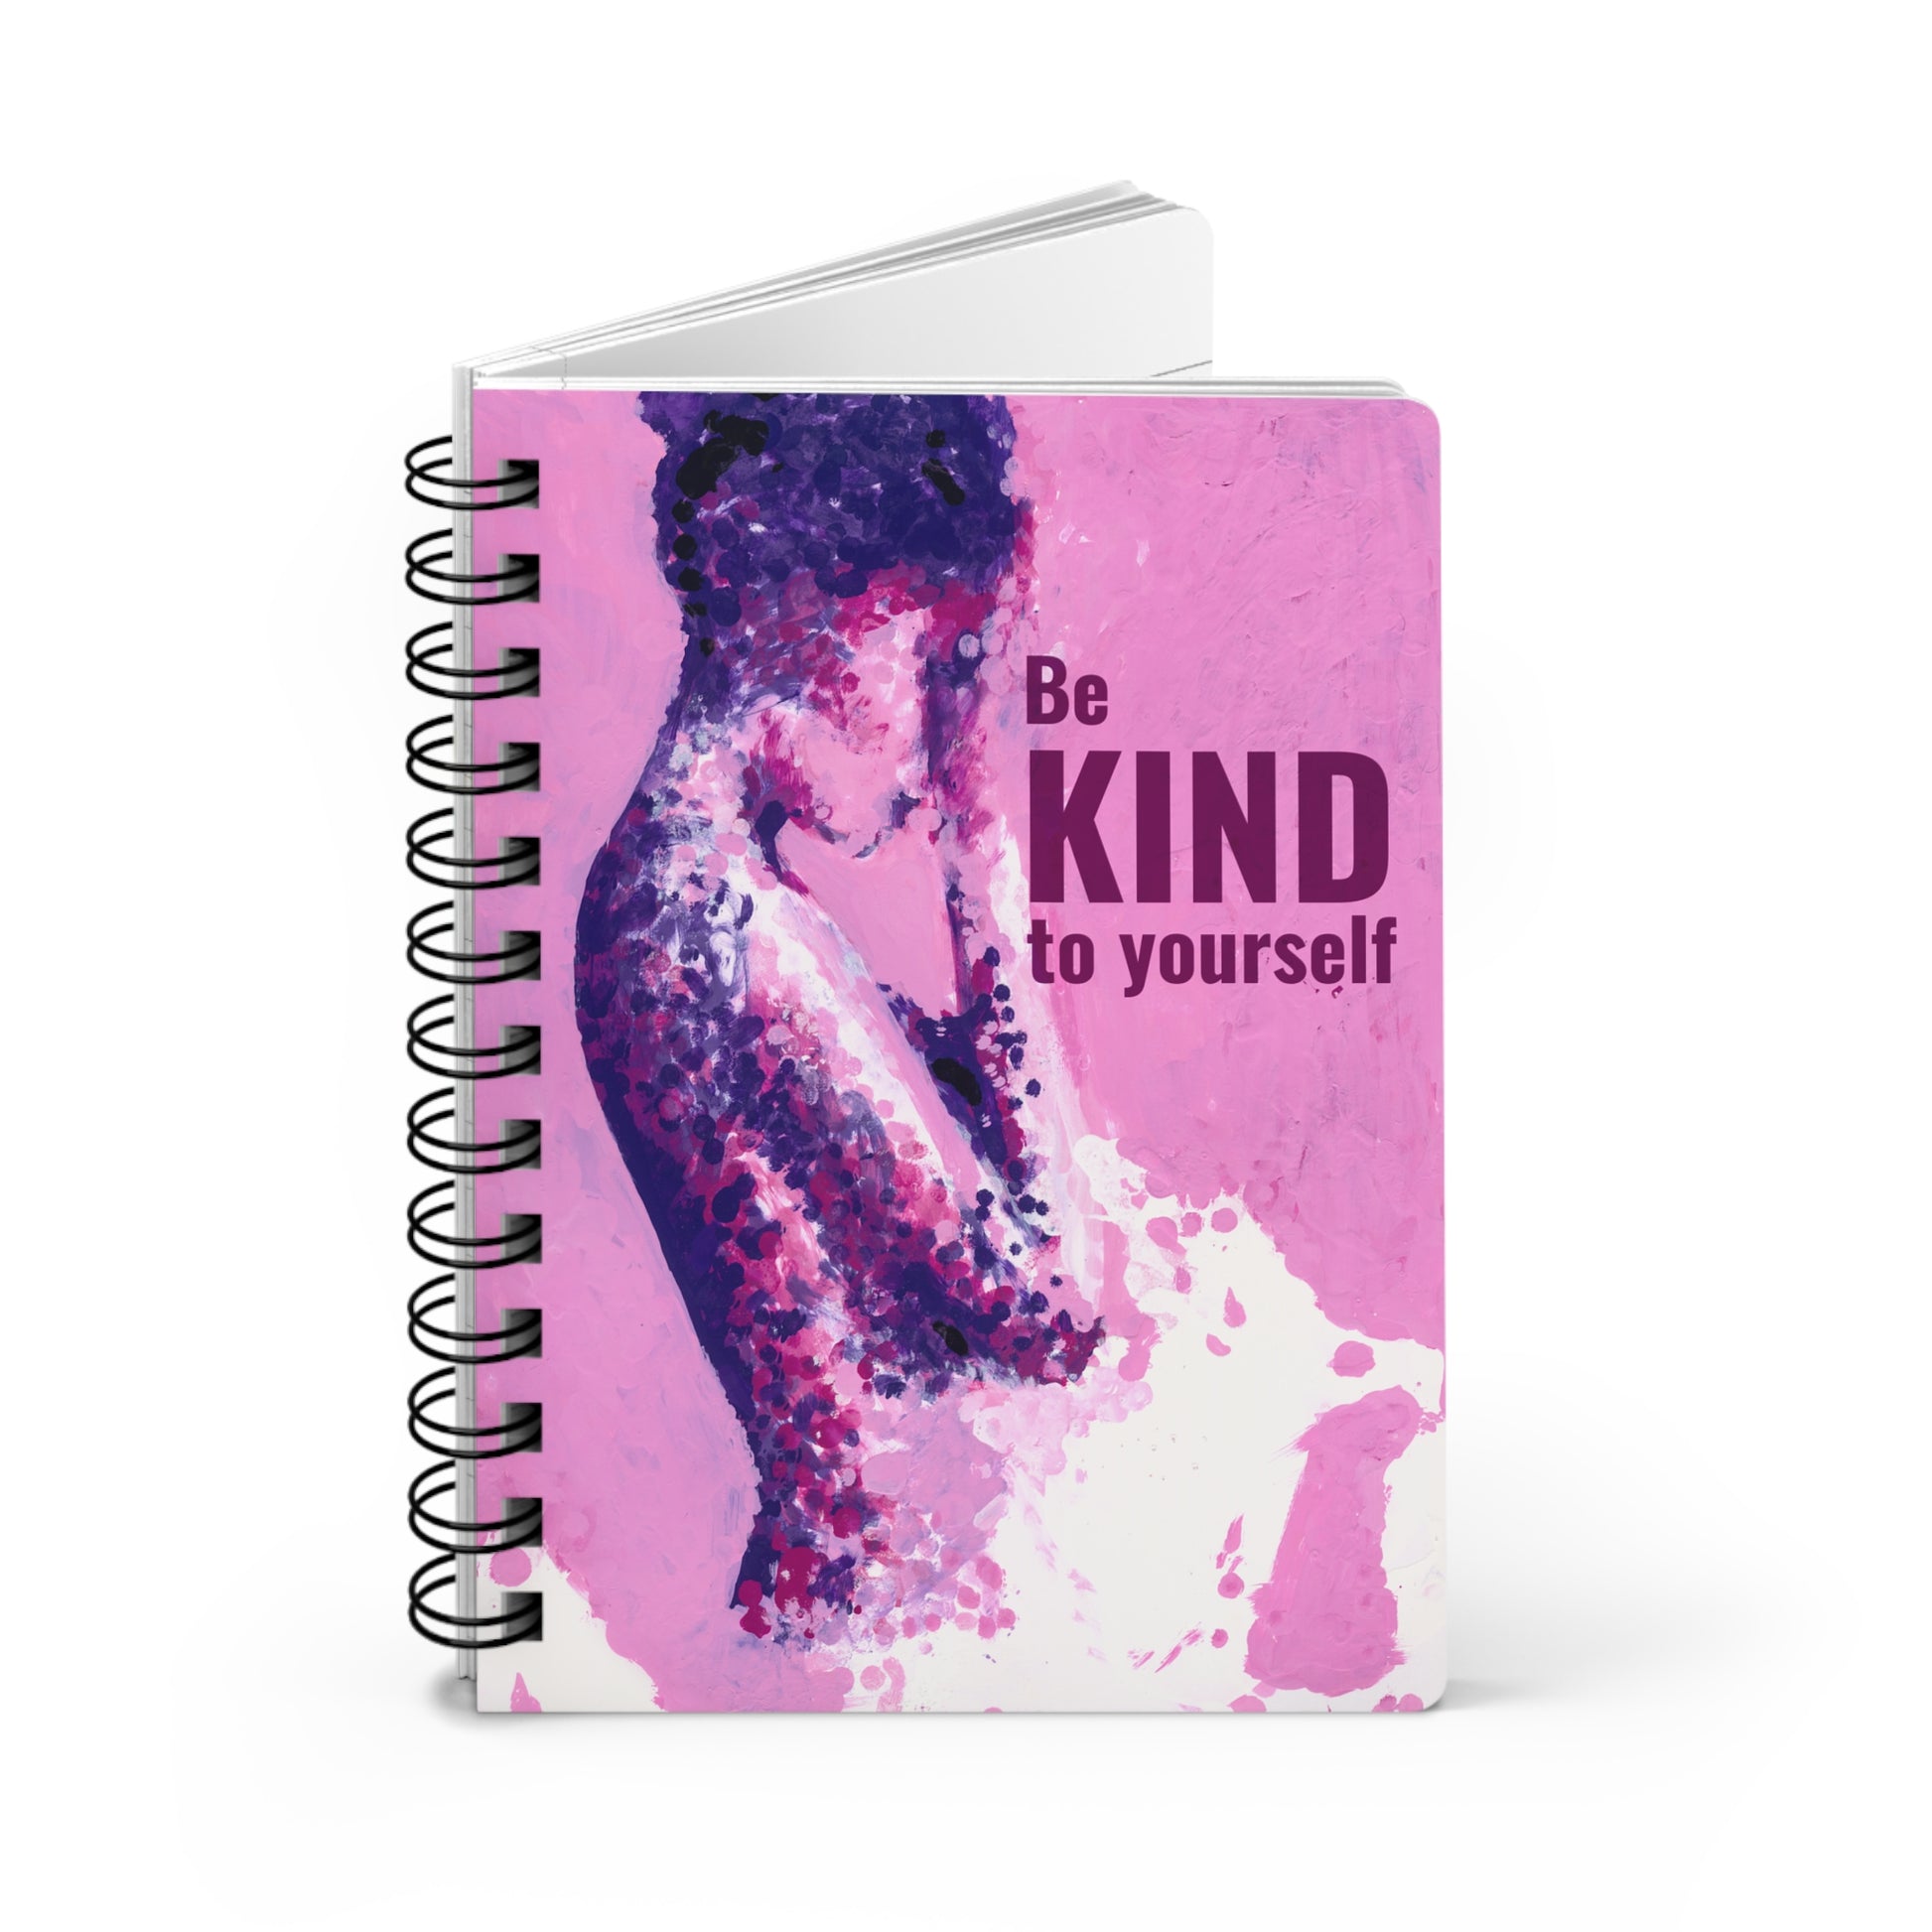 Be KIND to yourself: Spiral Journal/Norebook